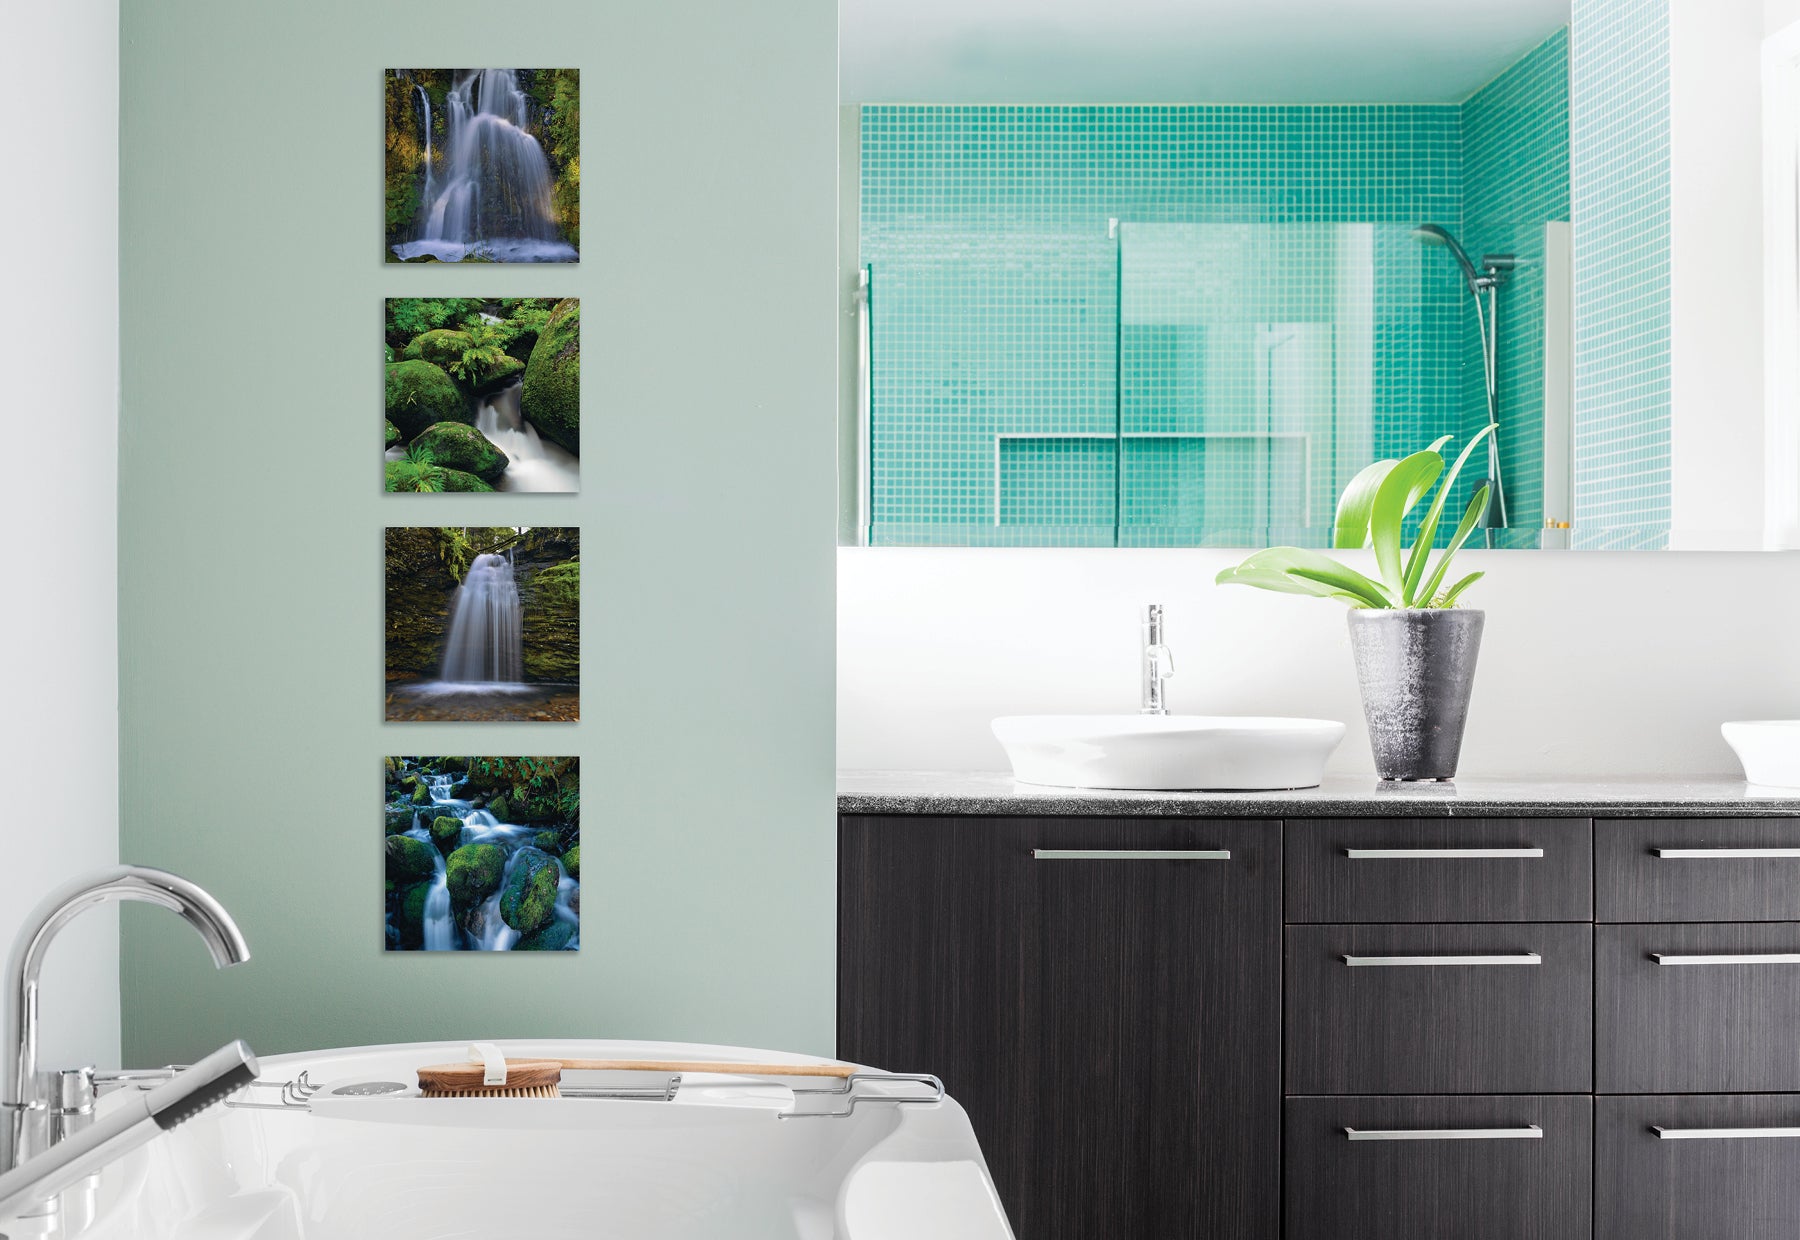 Modern residential bathroom with seafoam green walls and tile and dark wood vanity featuring four square photographs of waterfalls by Peter Lik